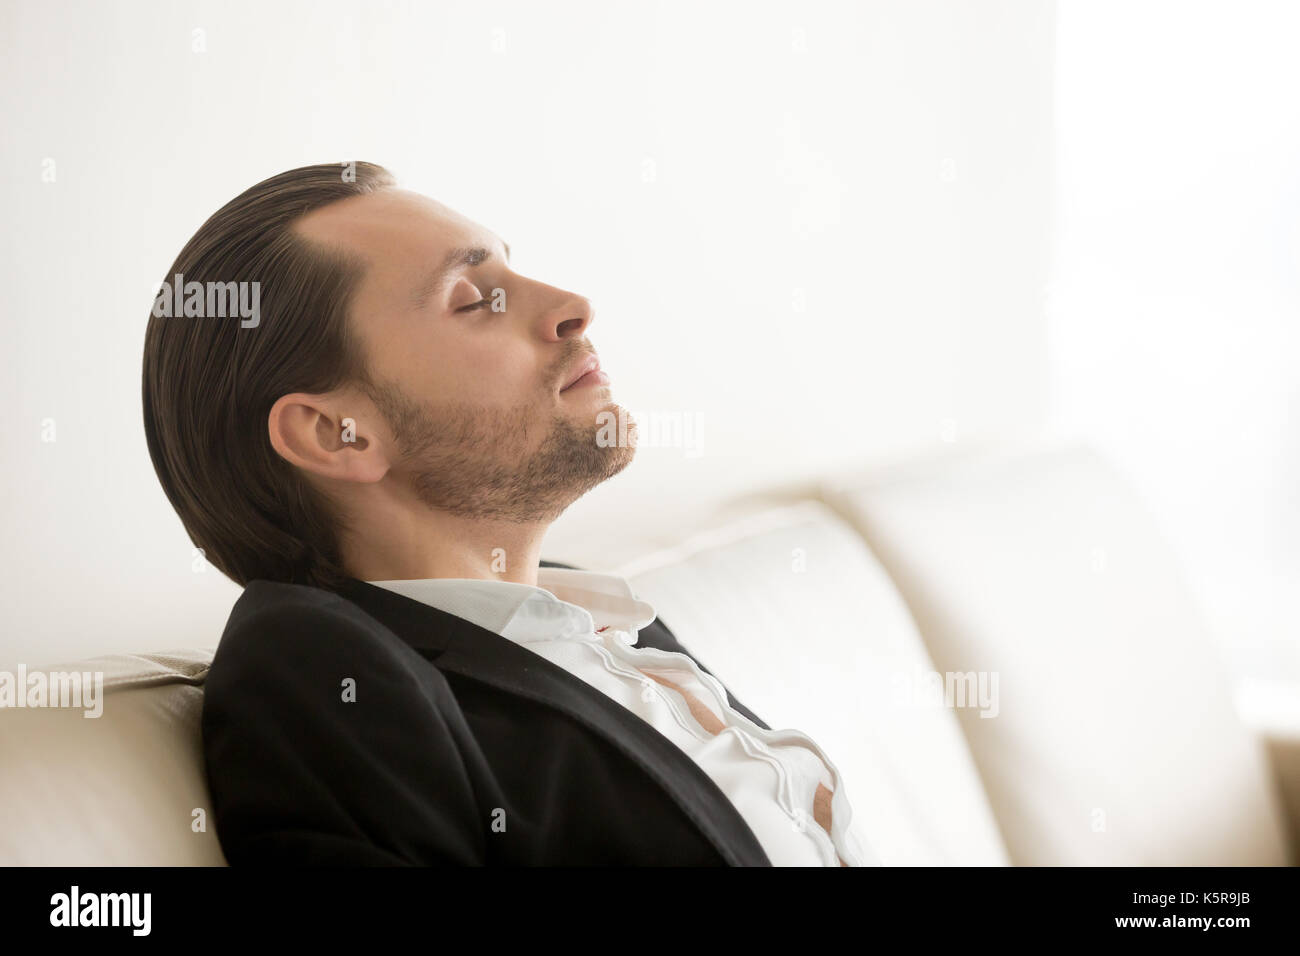 Young man in suit resting or meditating with eyes closed. Stock Photo